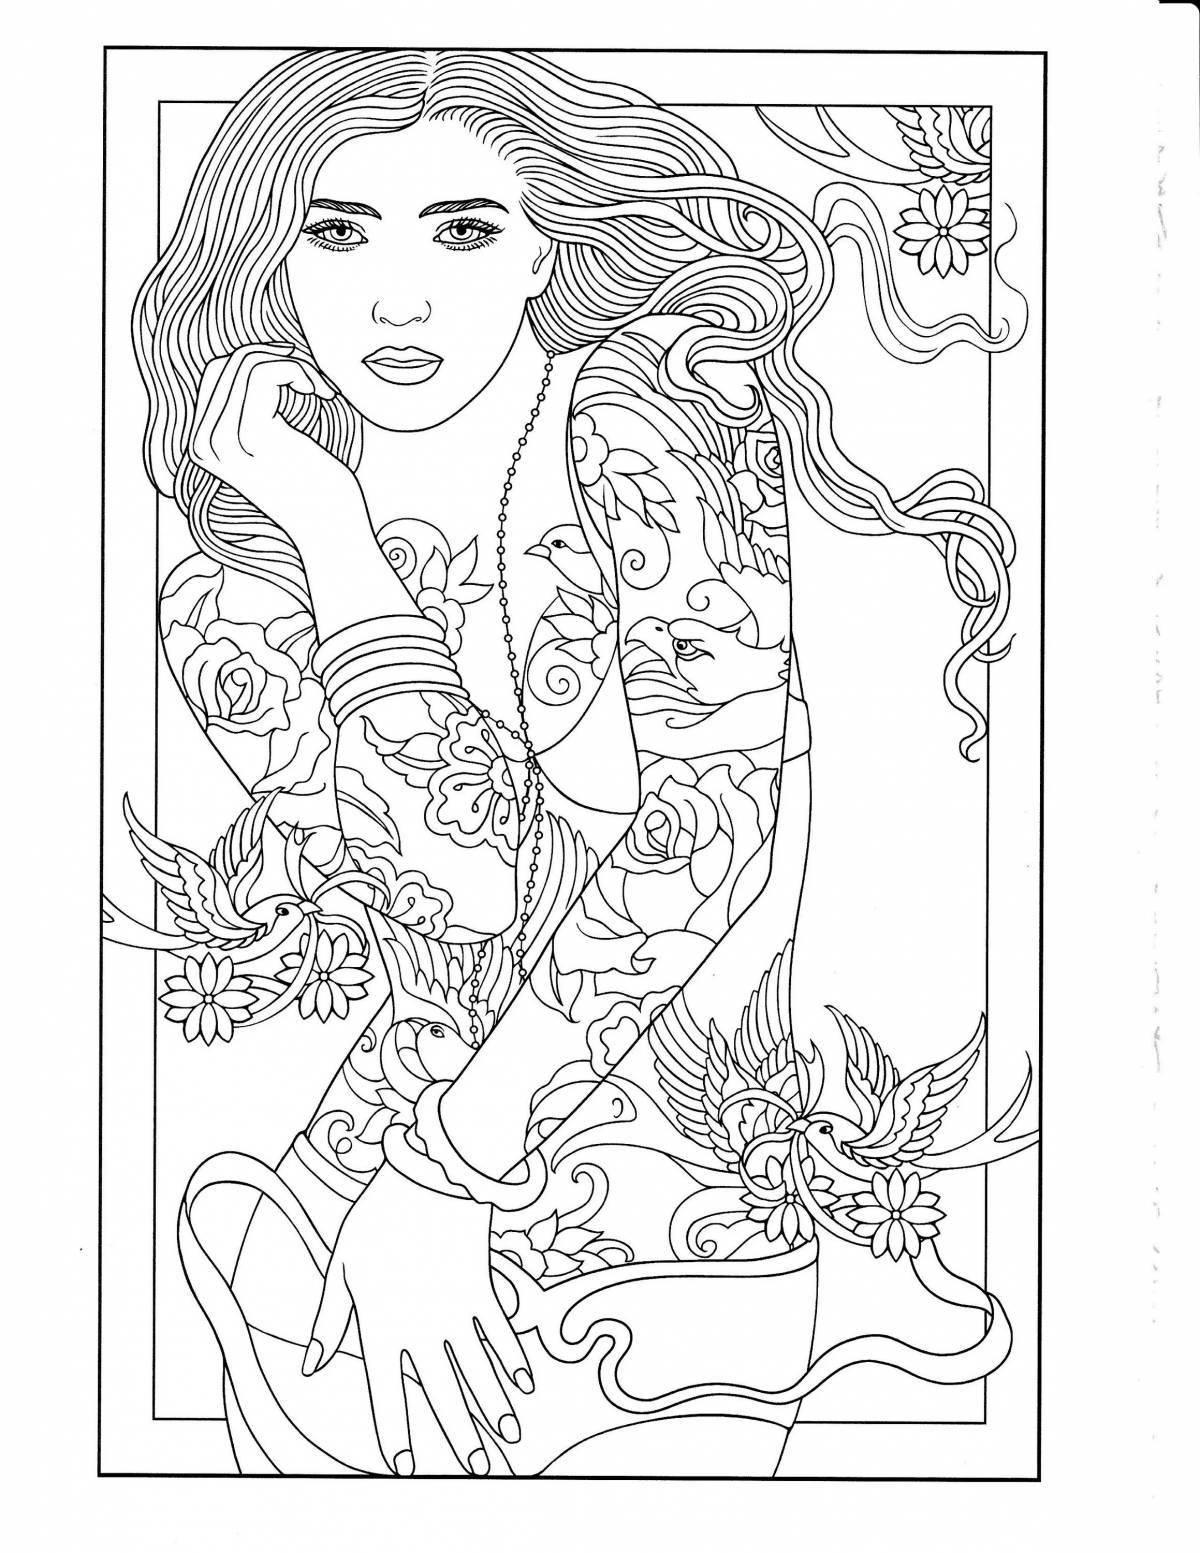 Great coloring book for all adults 18